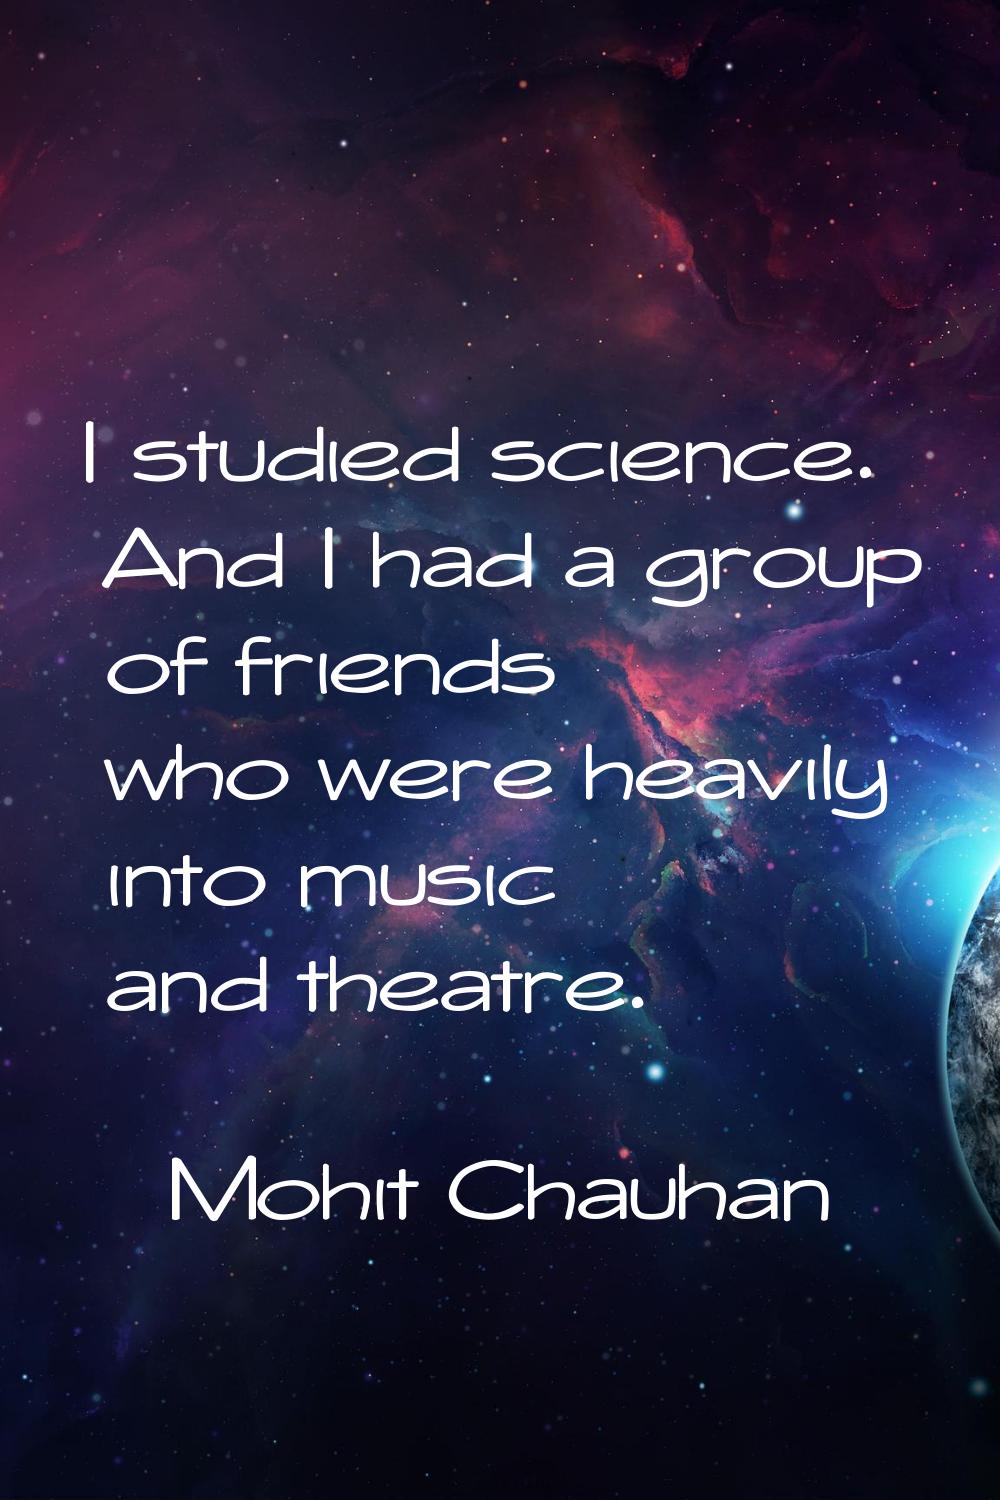 I studied science. And I had a group of friends who were heavily into music and theatre.